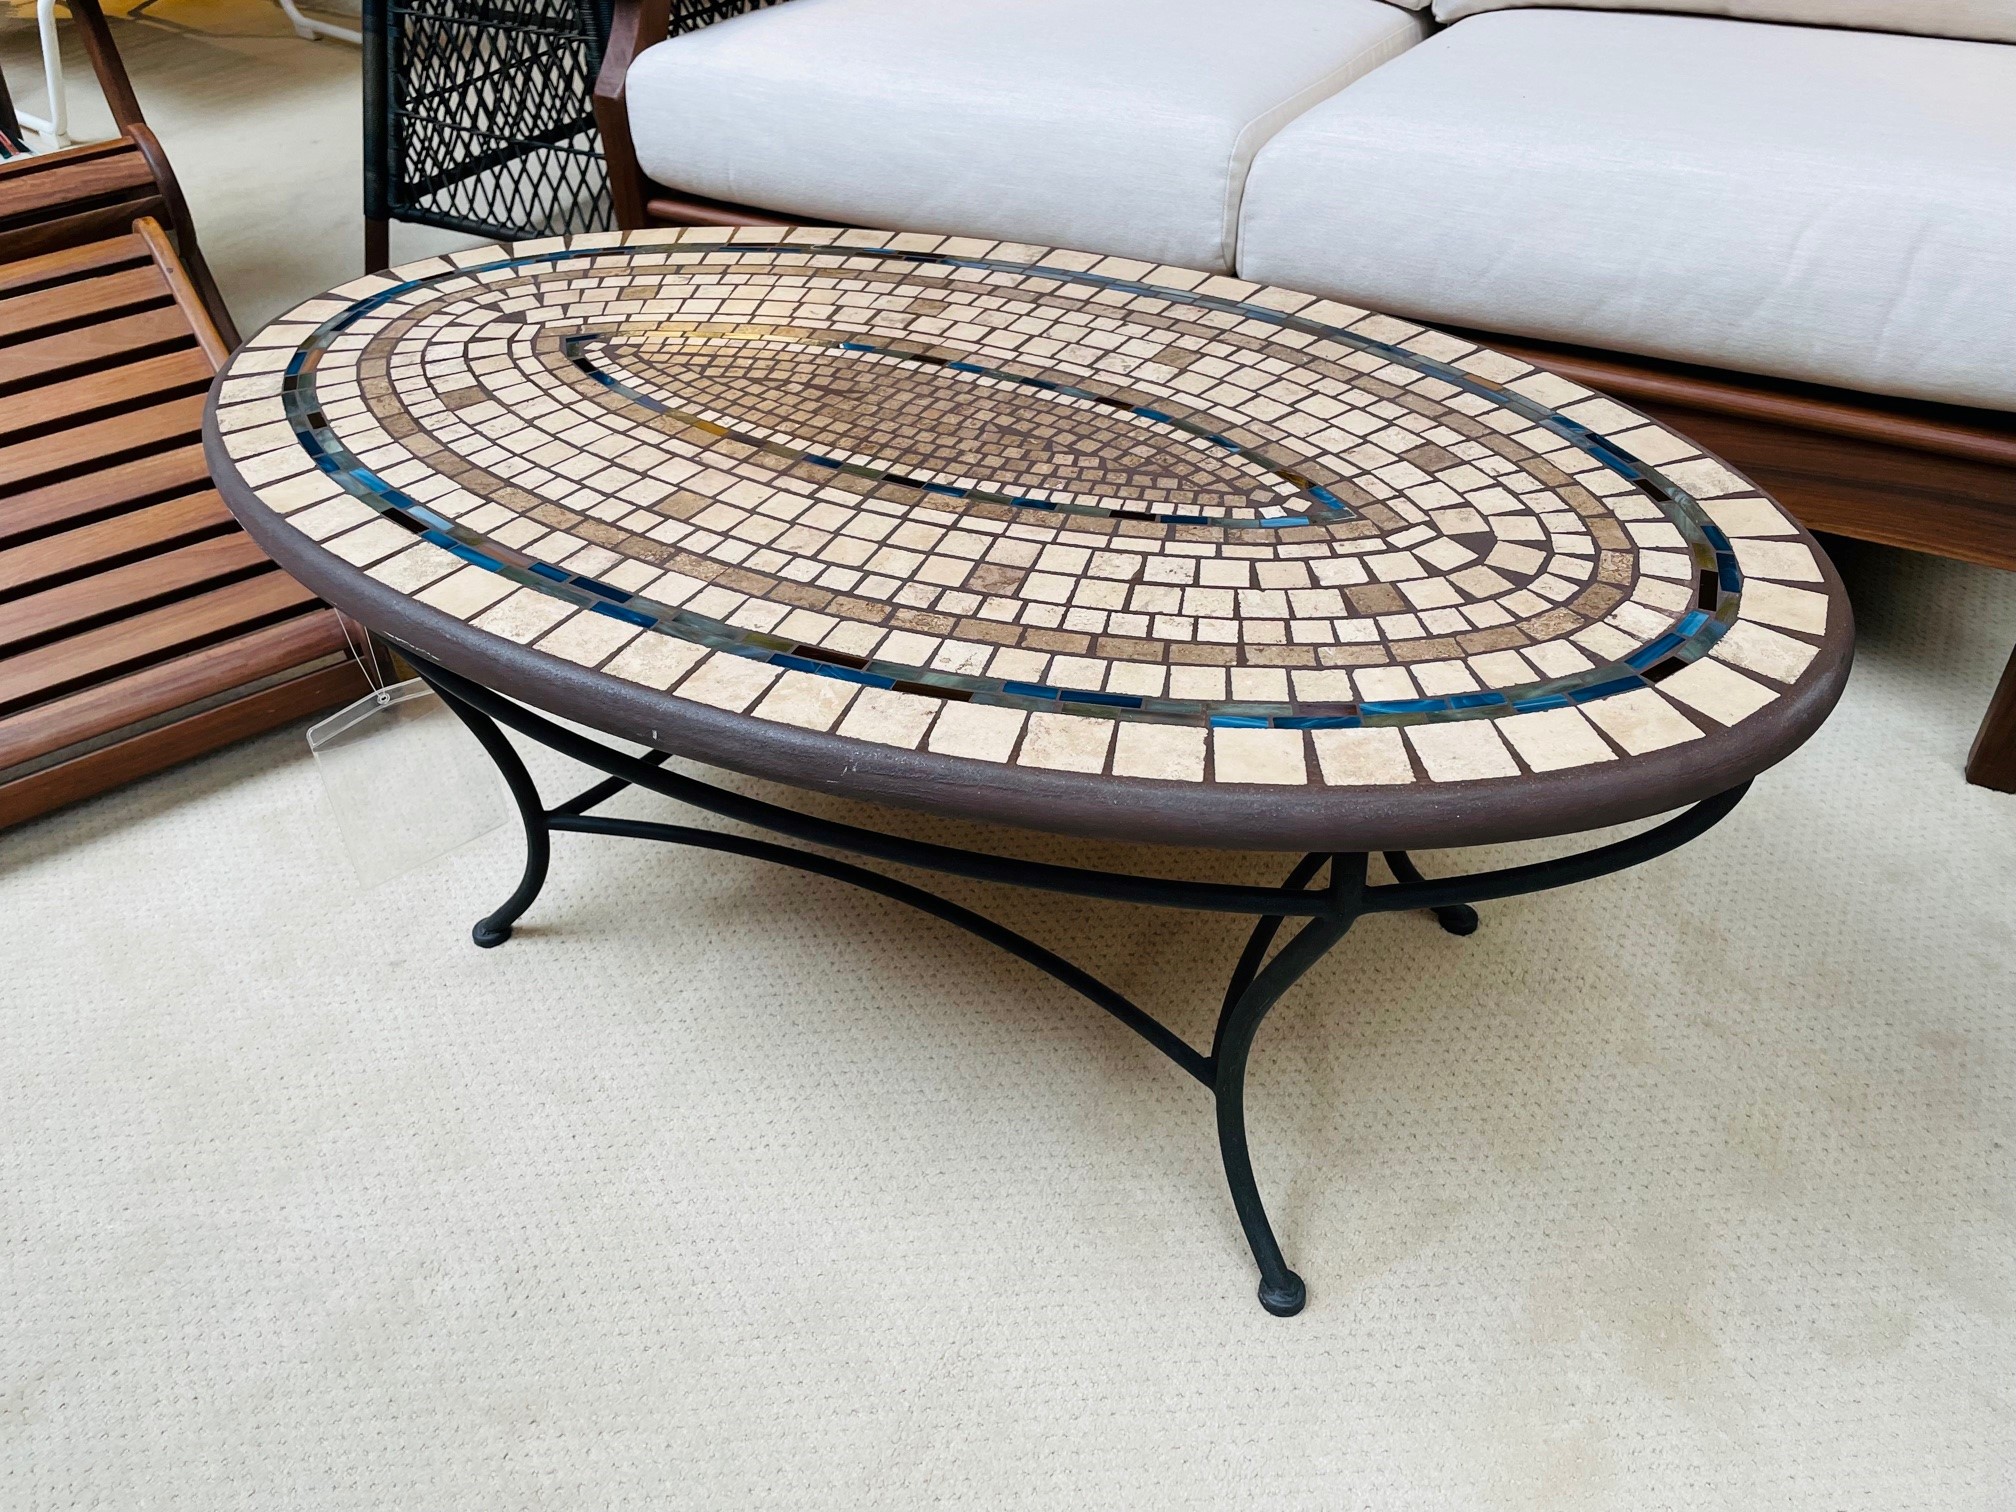 KNFD Mosaic Oval Cocktail Table